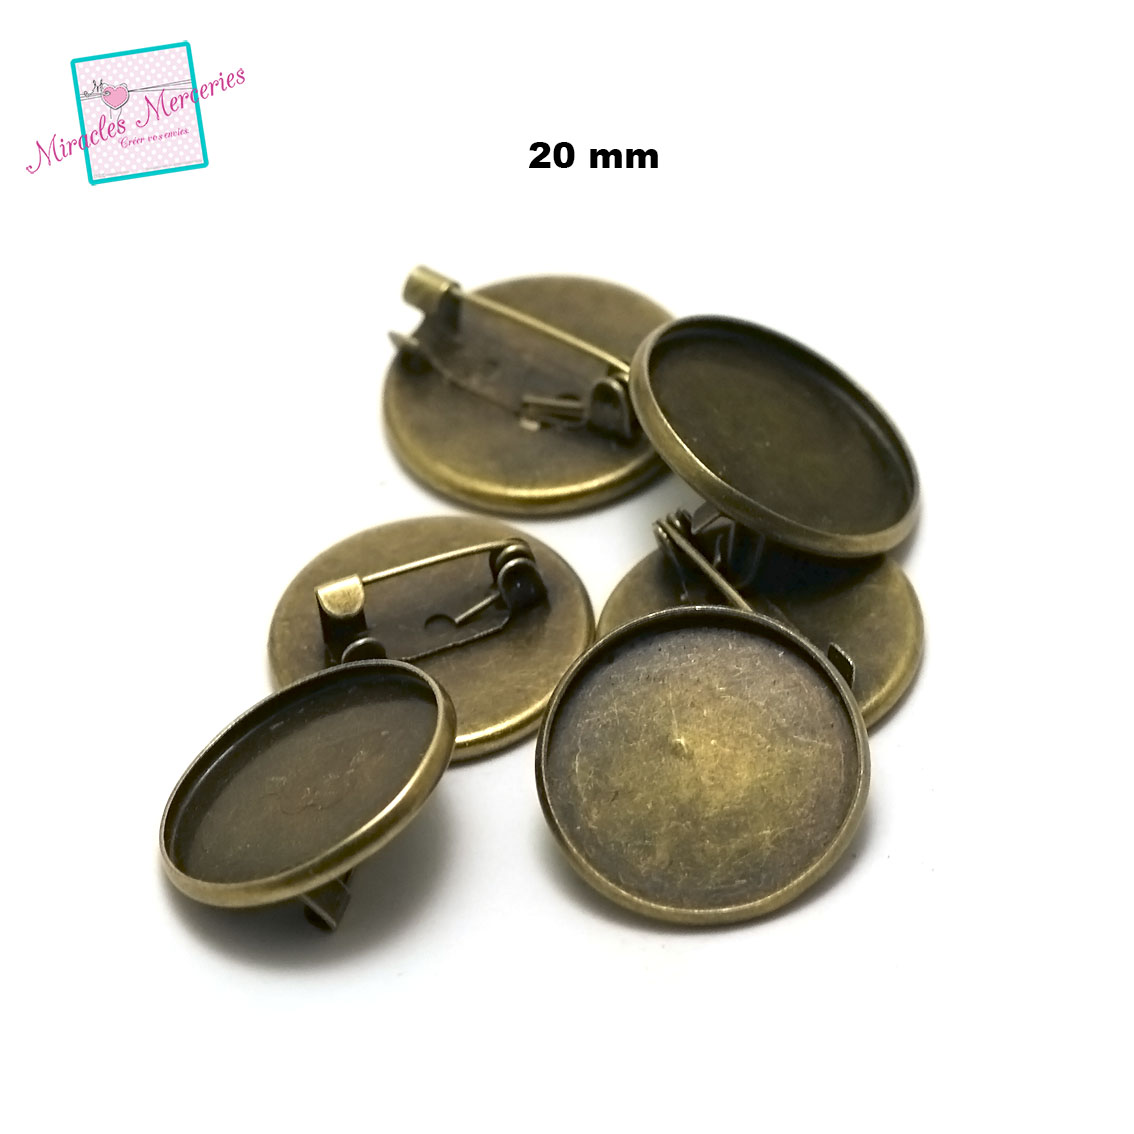 10 broches support cabochon ronde 20 mm,bronze